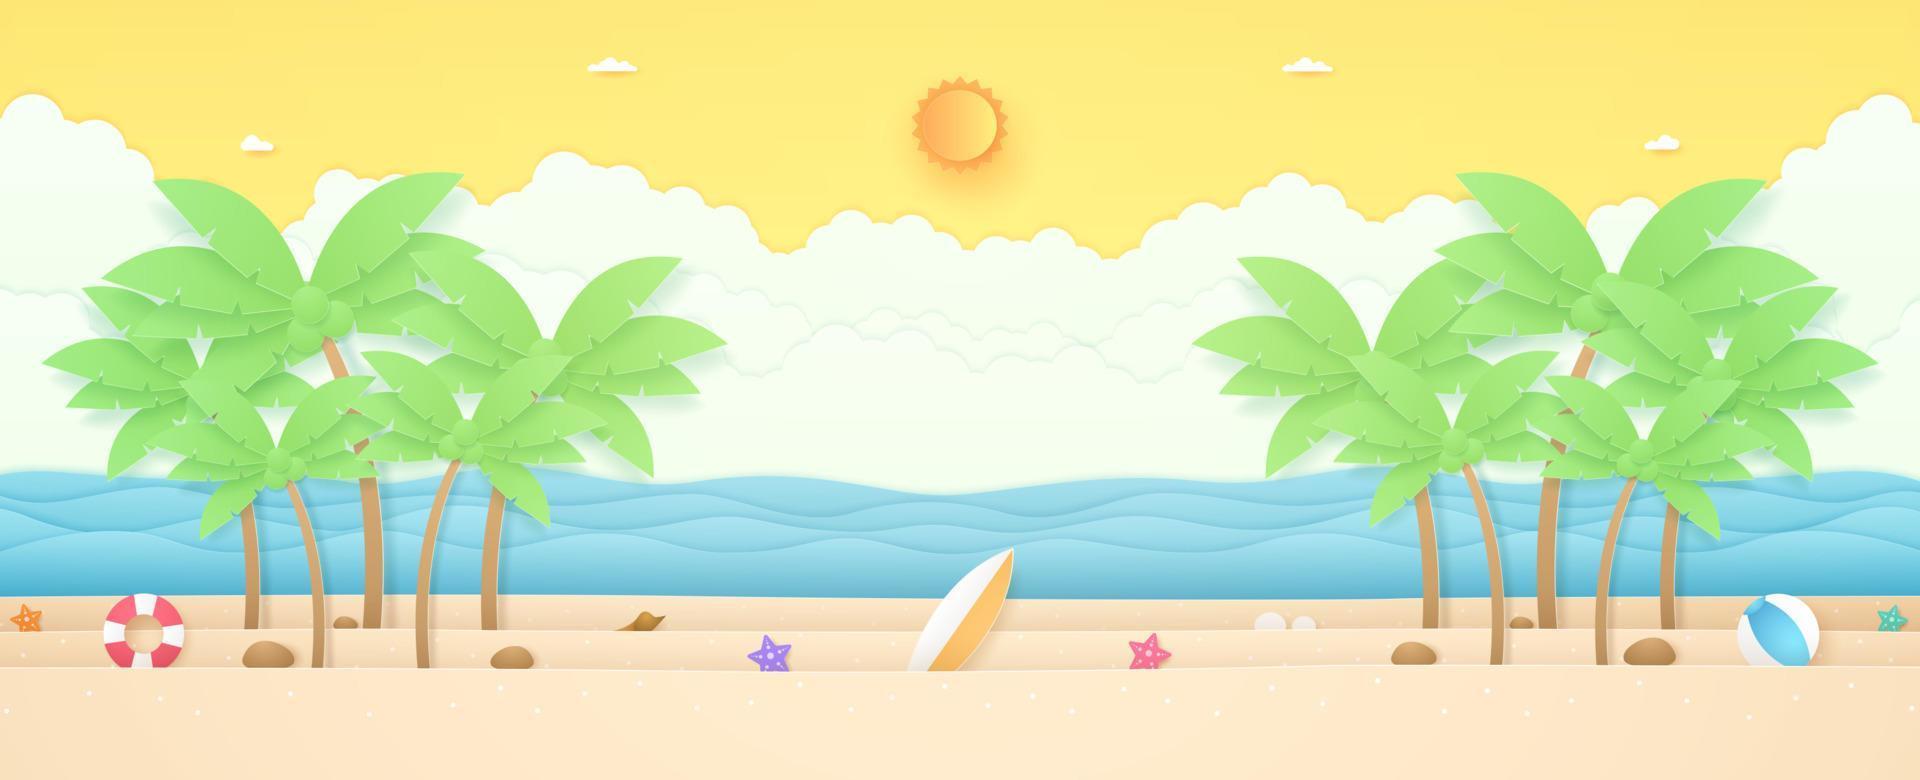 Summer Time, seascape, landscape, starfish, balloon and summer stuff on beach with wavy sea and coconut tree on island, bright sun and sunny sky, paper art style vector